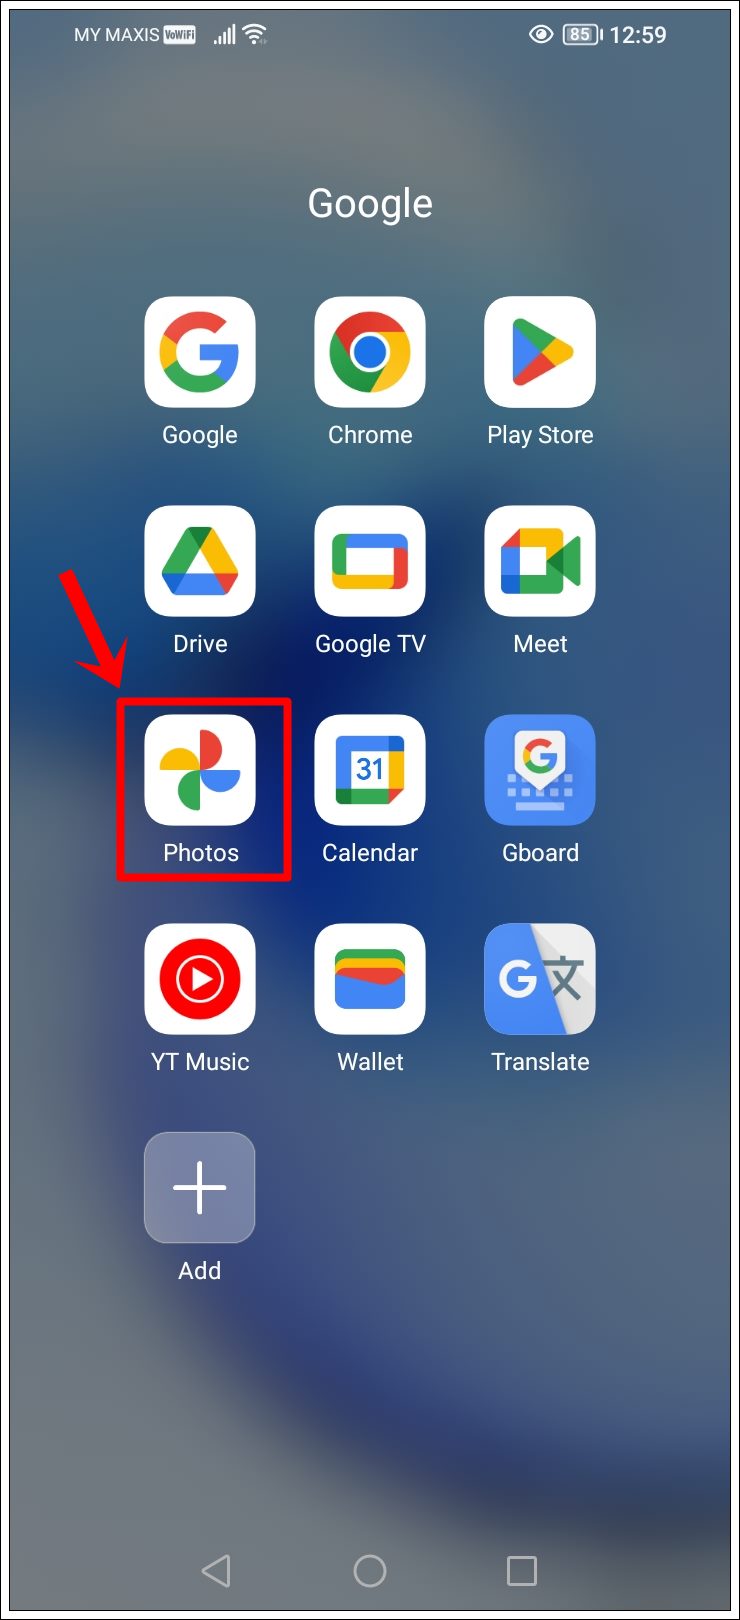 This image shows a screenshot of an Android phone with the Google Photos app icon highlighted.